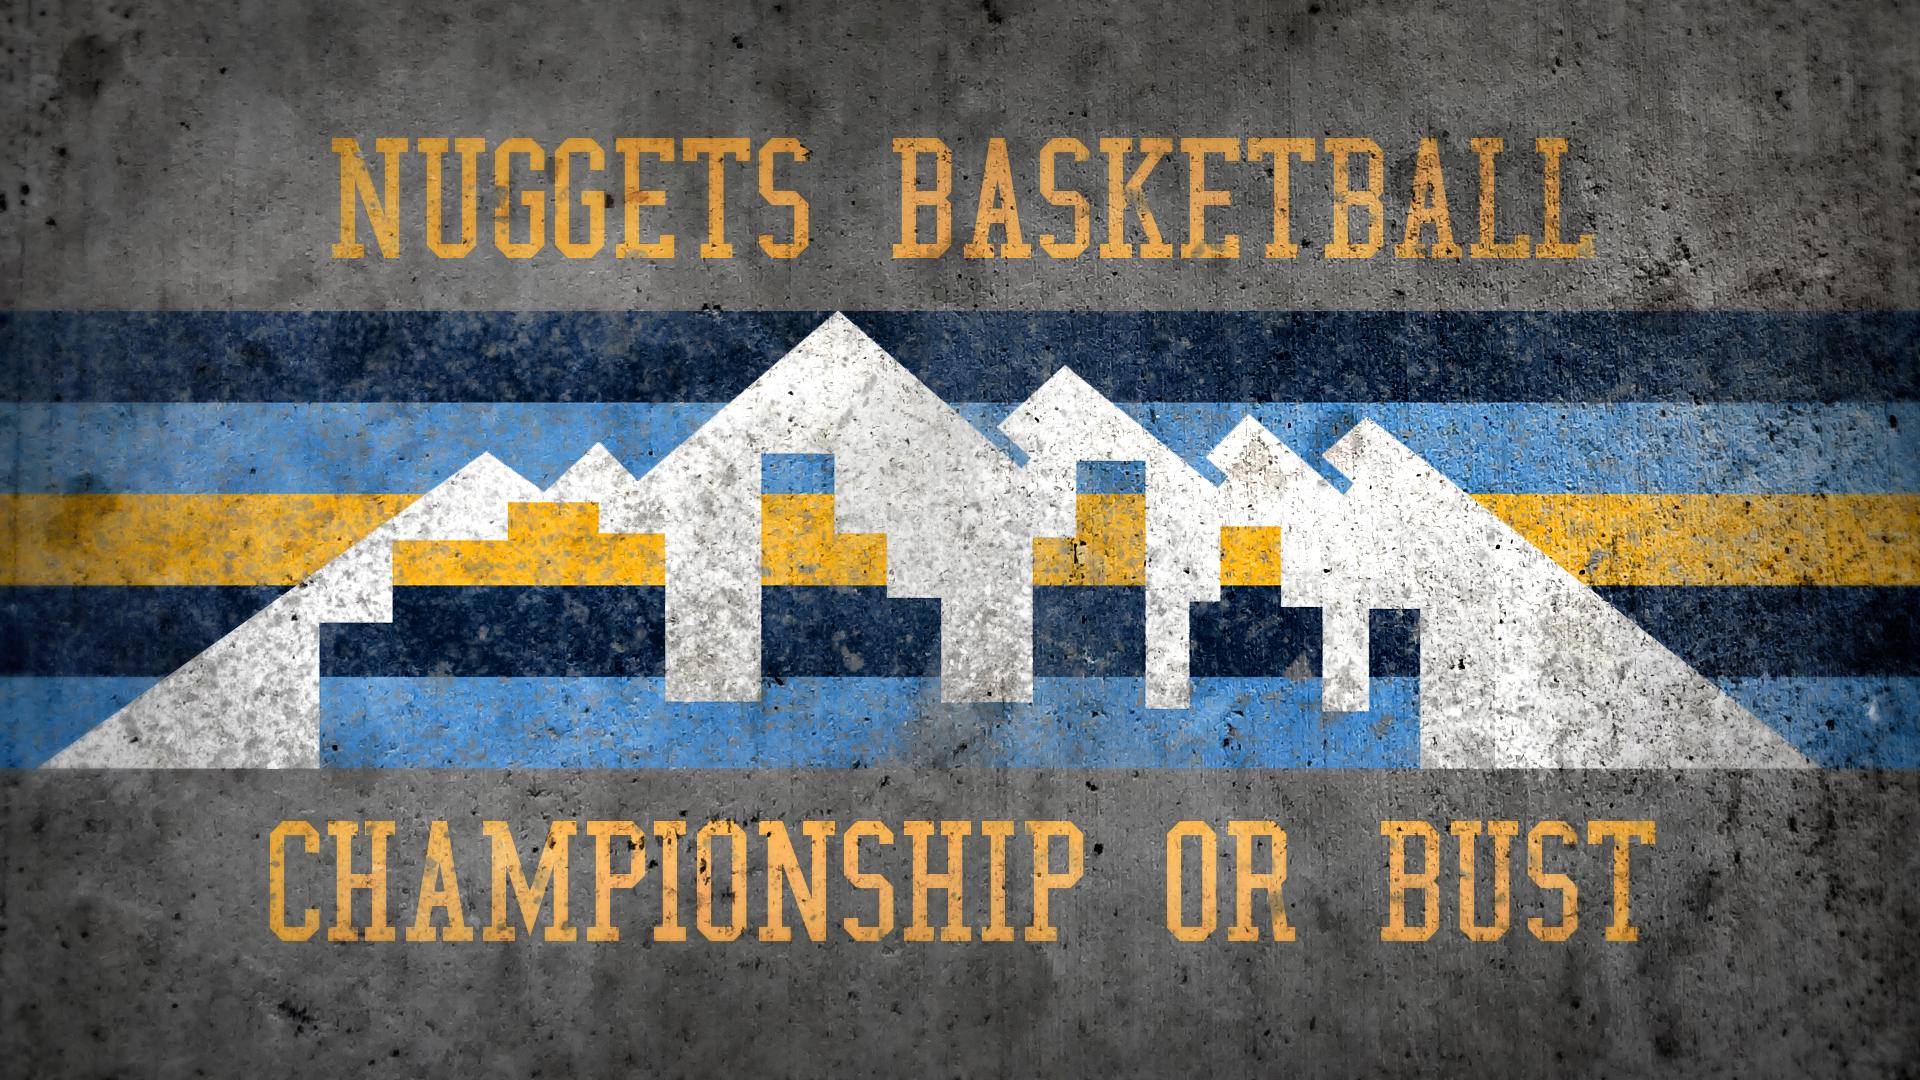 Download Denver Nuggets wallpapers for mobile phone, free